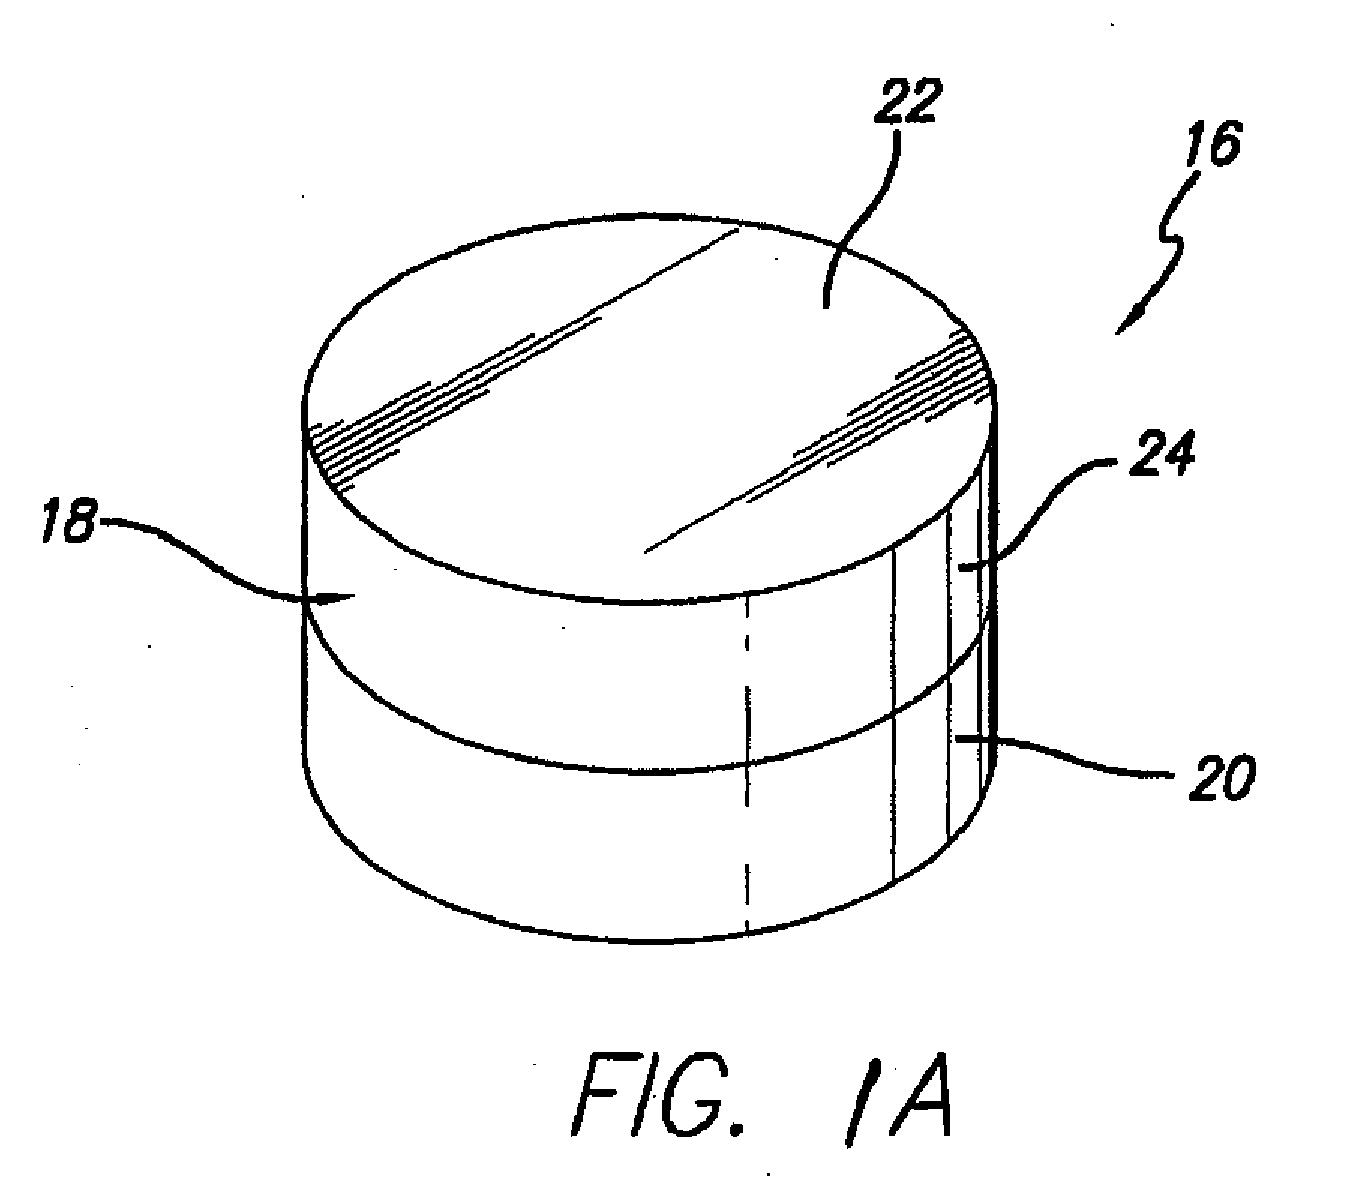 Polycrystalline diamond cutting elements having improved thermal resistance